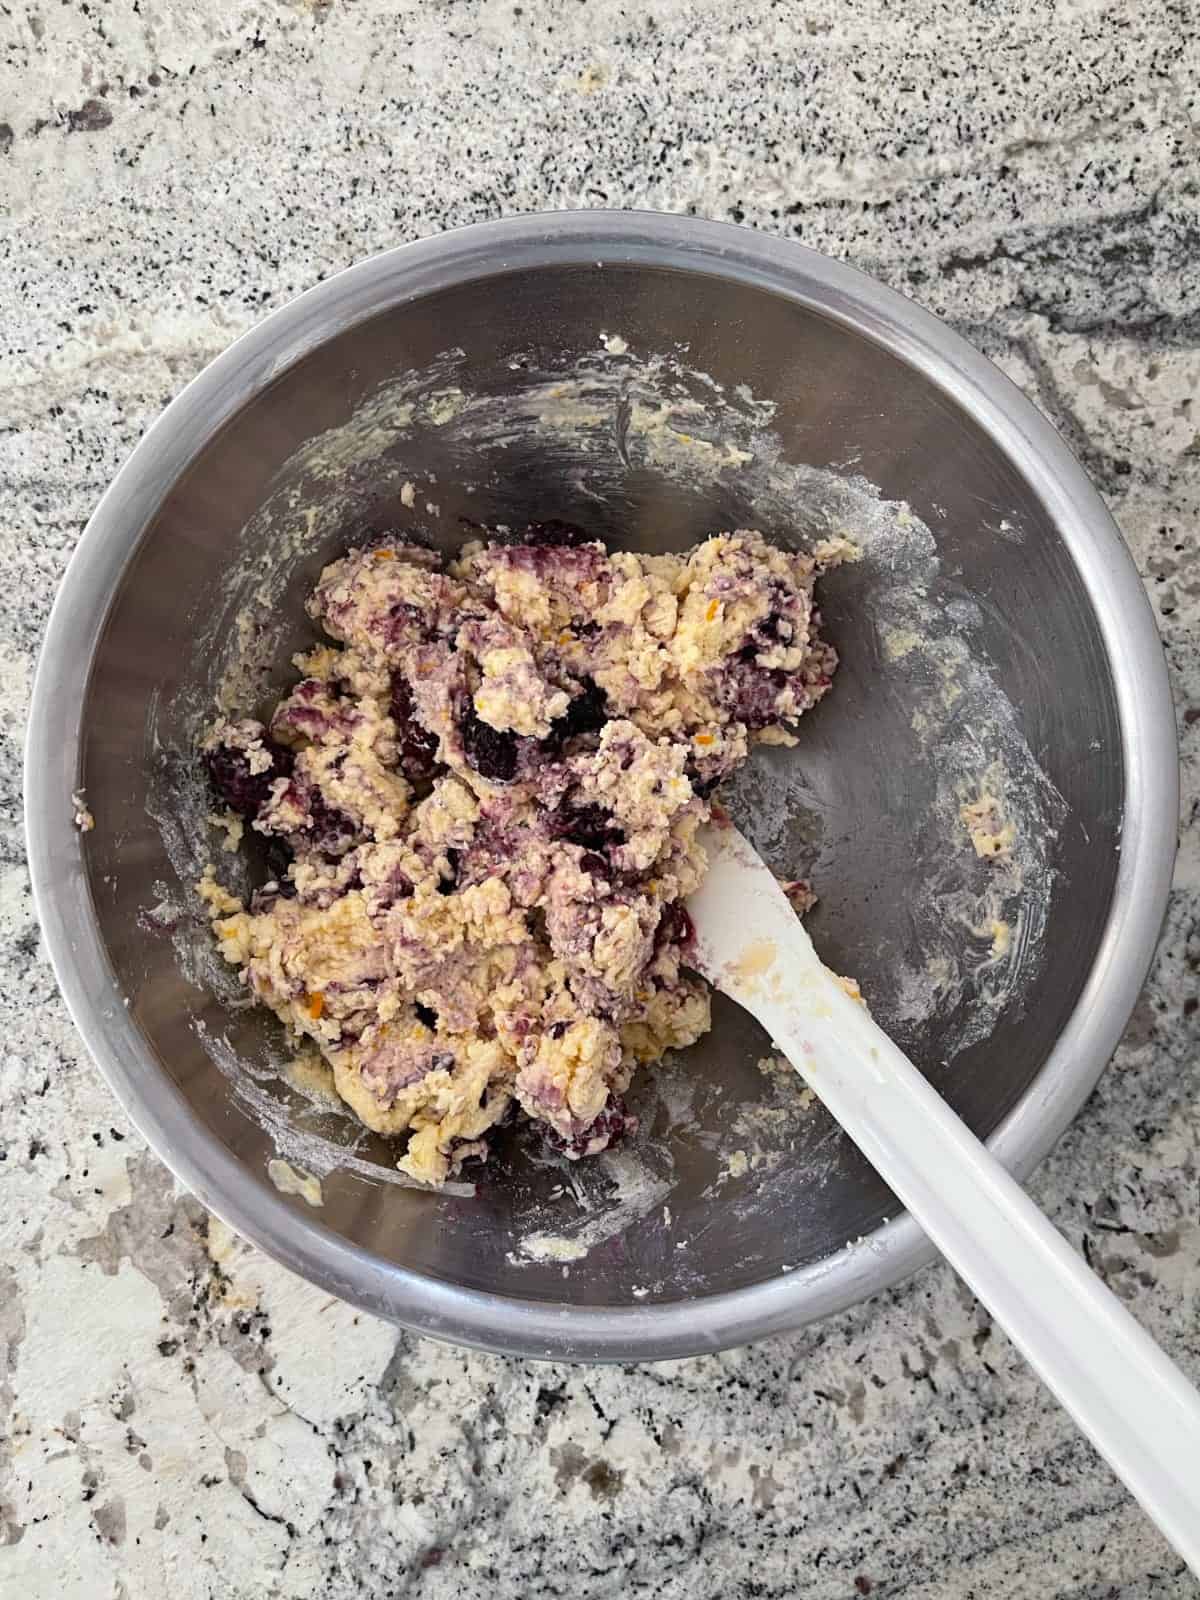 Mixing blackberry muffin batter in stainless bowl with spatula.